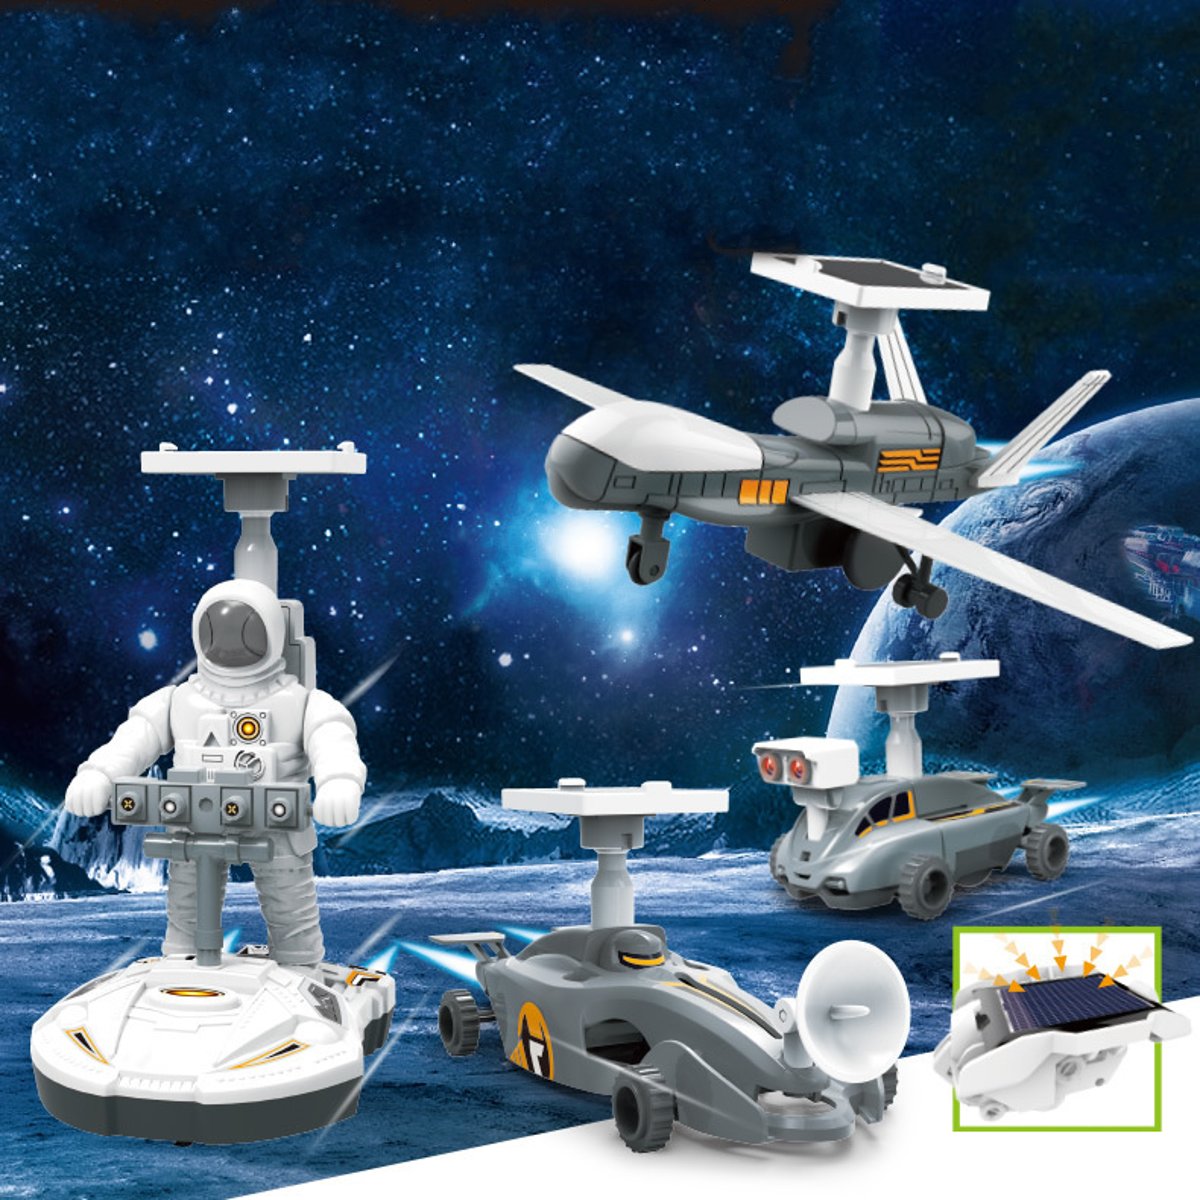 

4 IN 1 DIY Assemble Solar Powered Space Robot Kit Model Toy for Kids Gift